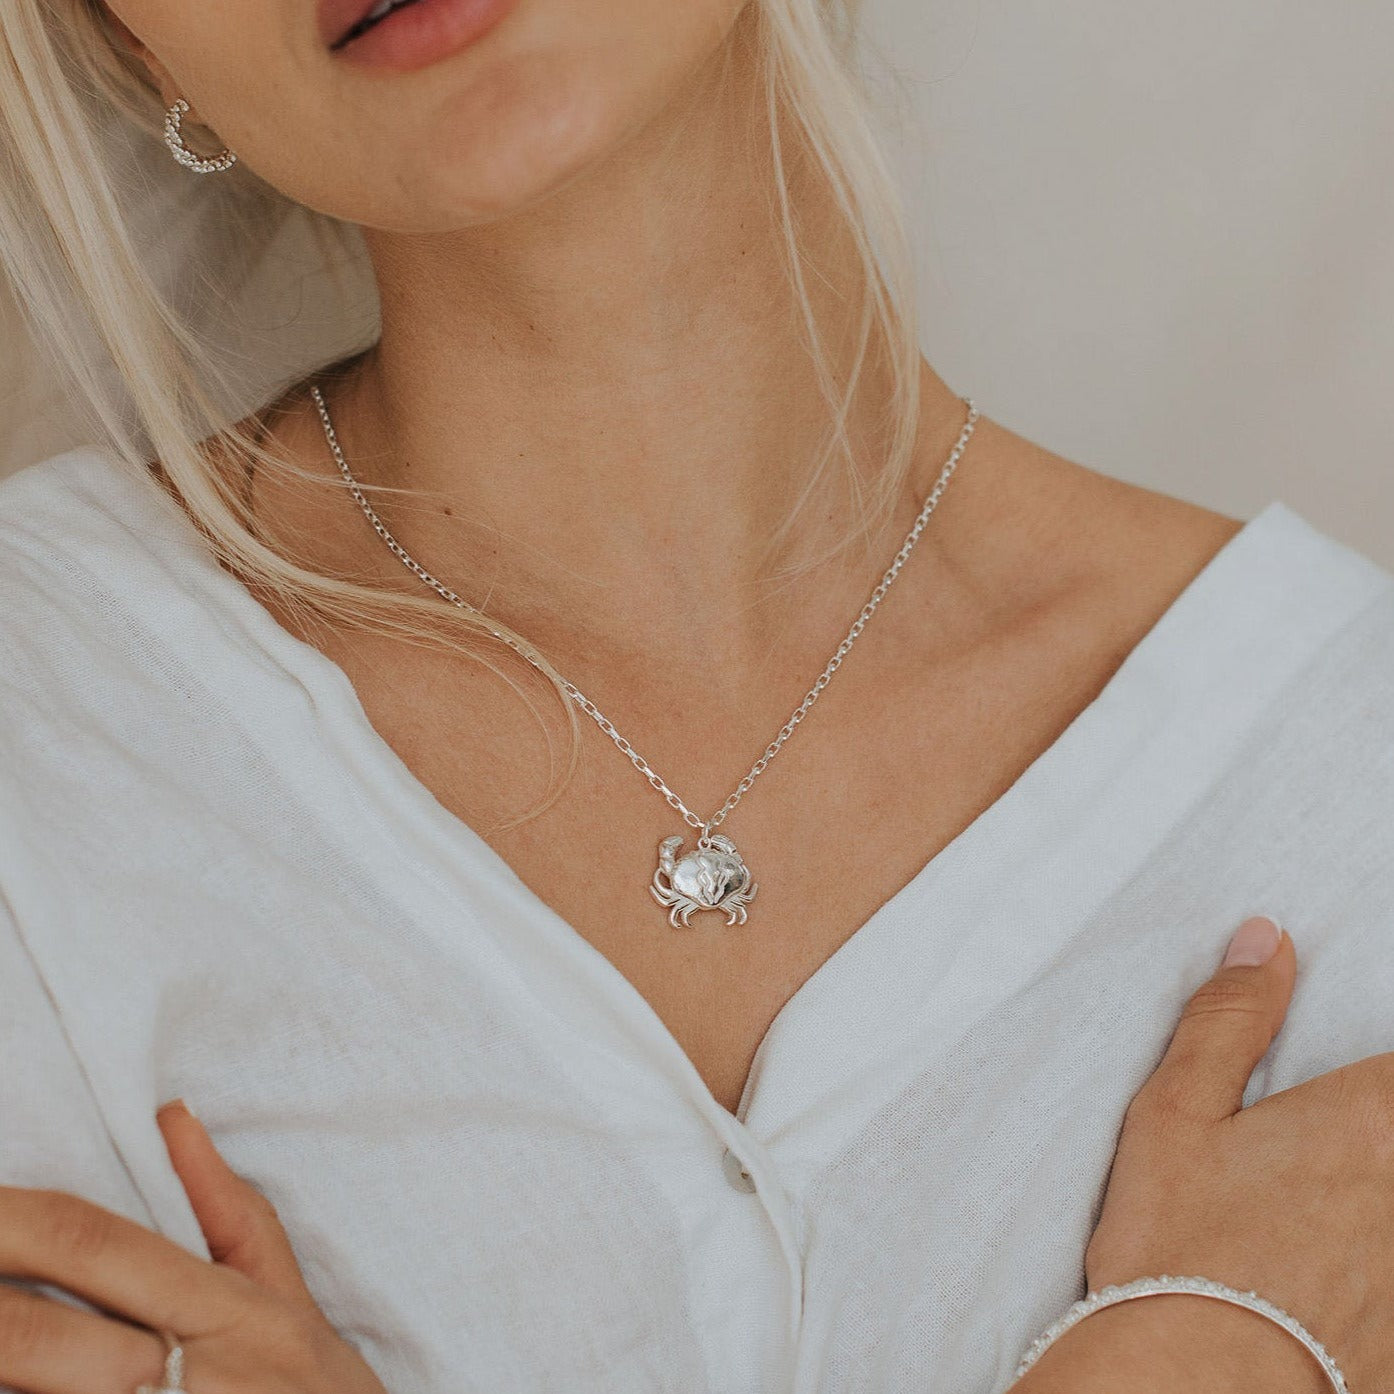 Mr Crab Silver Necklace - Dainty London